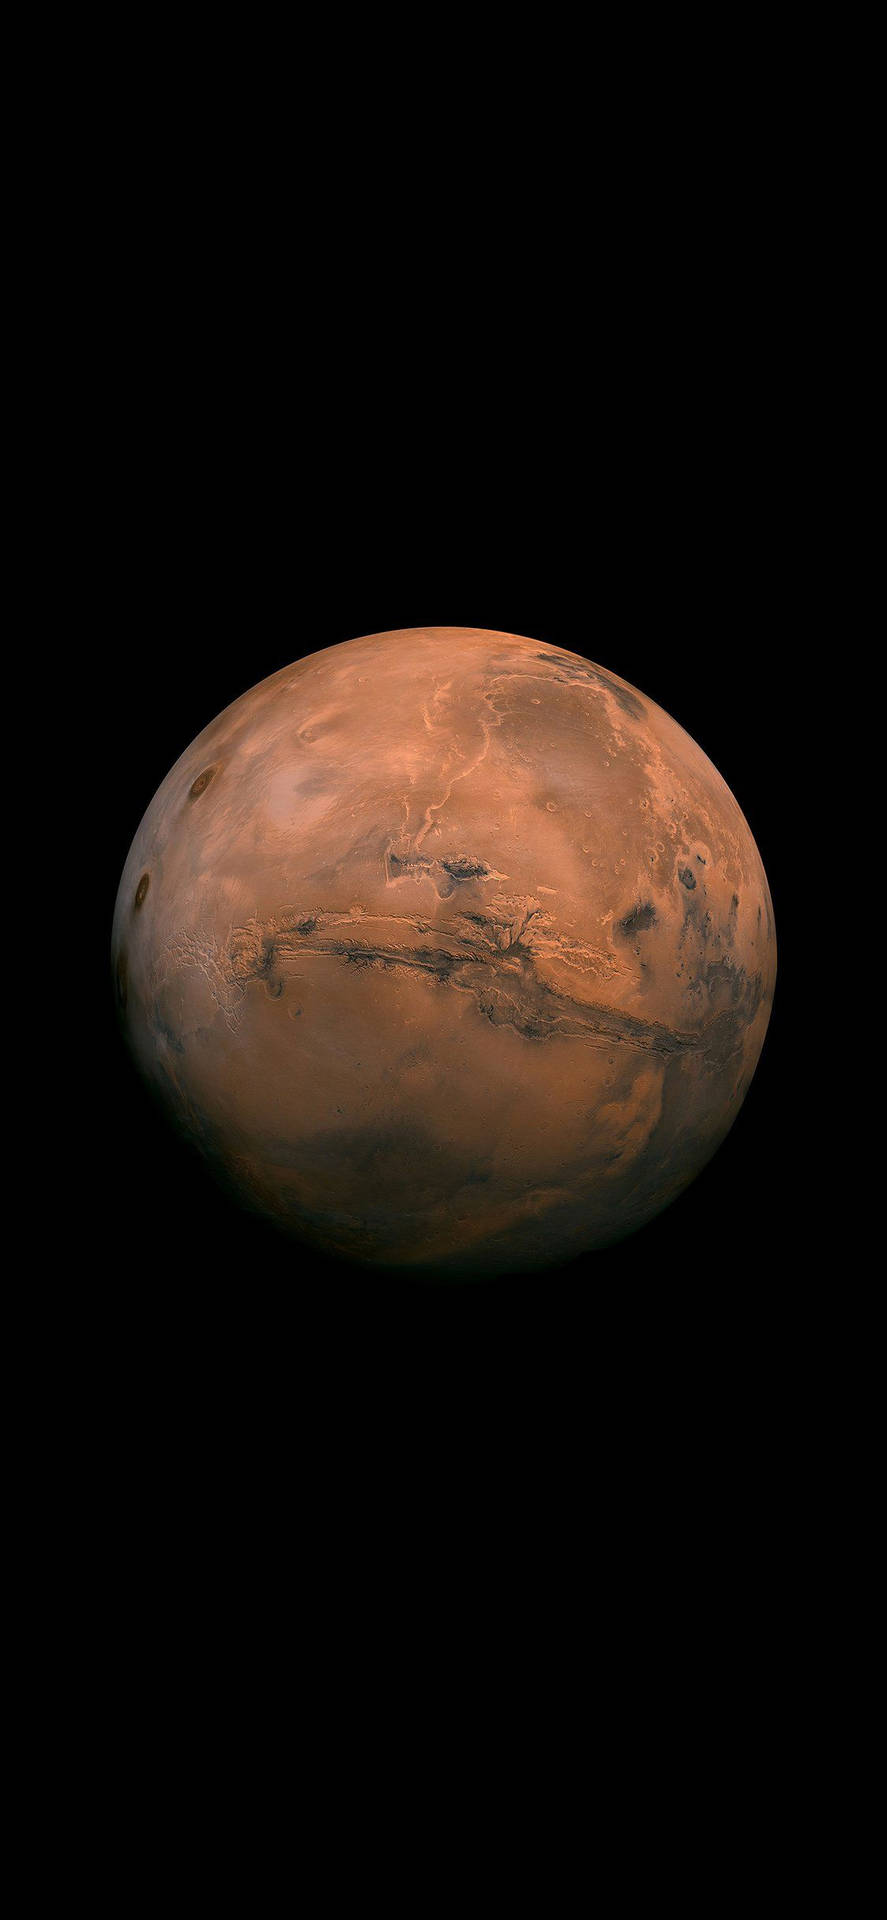 Mars Perseverance wallpapers for iPhone